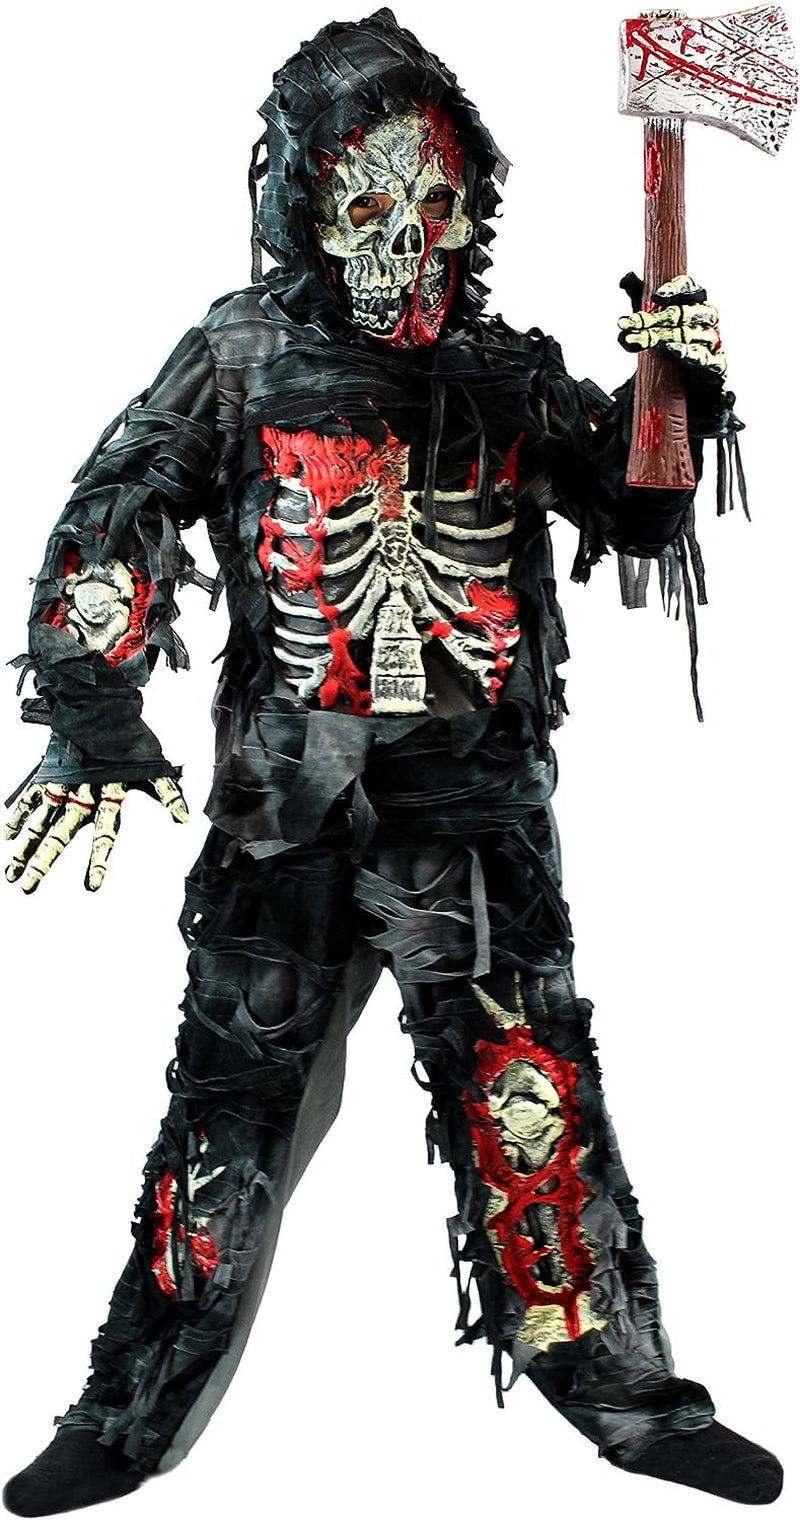 Spooktacular Creations Zombie Deluxe Costume, Scary Halloween Zombie Costume for Boys, Monsters Costume with Toy Axe  Spooktacular Creations   